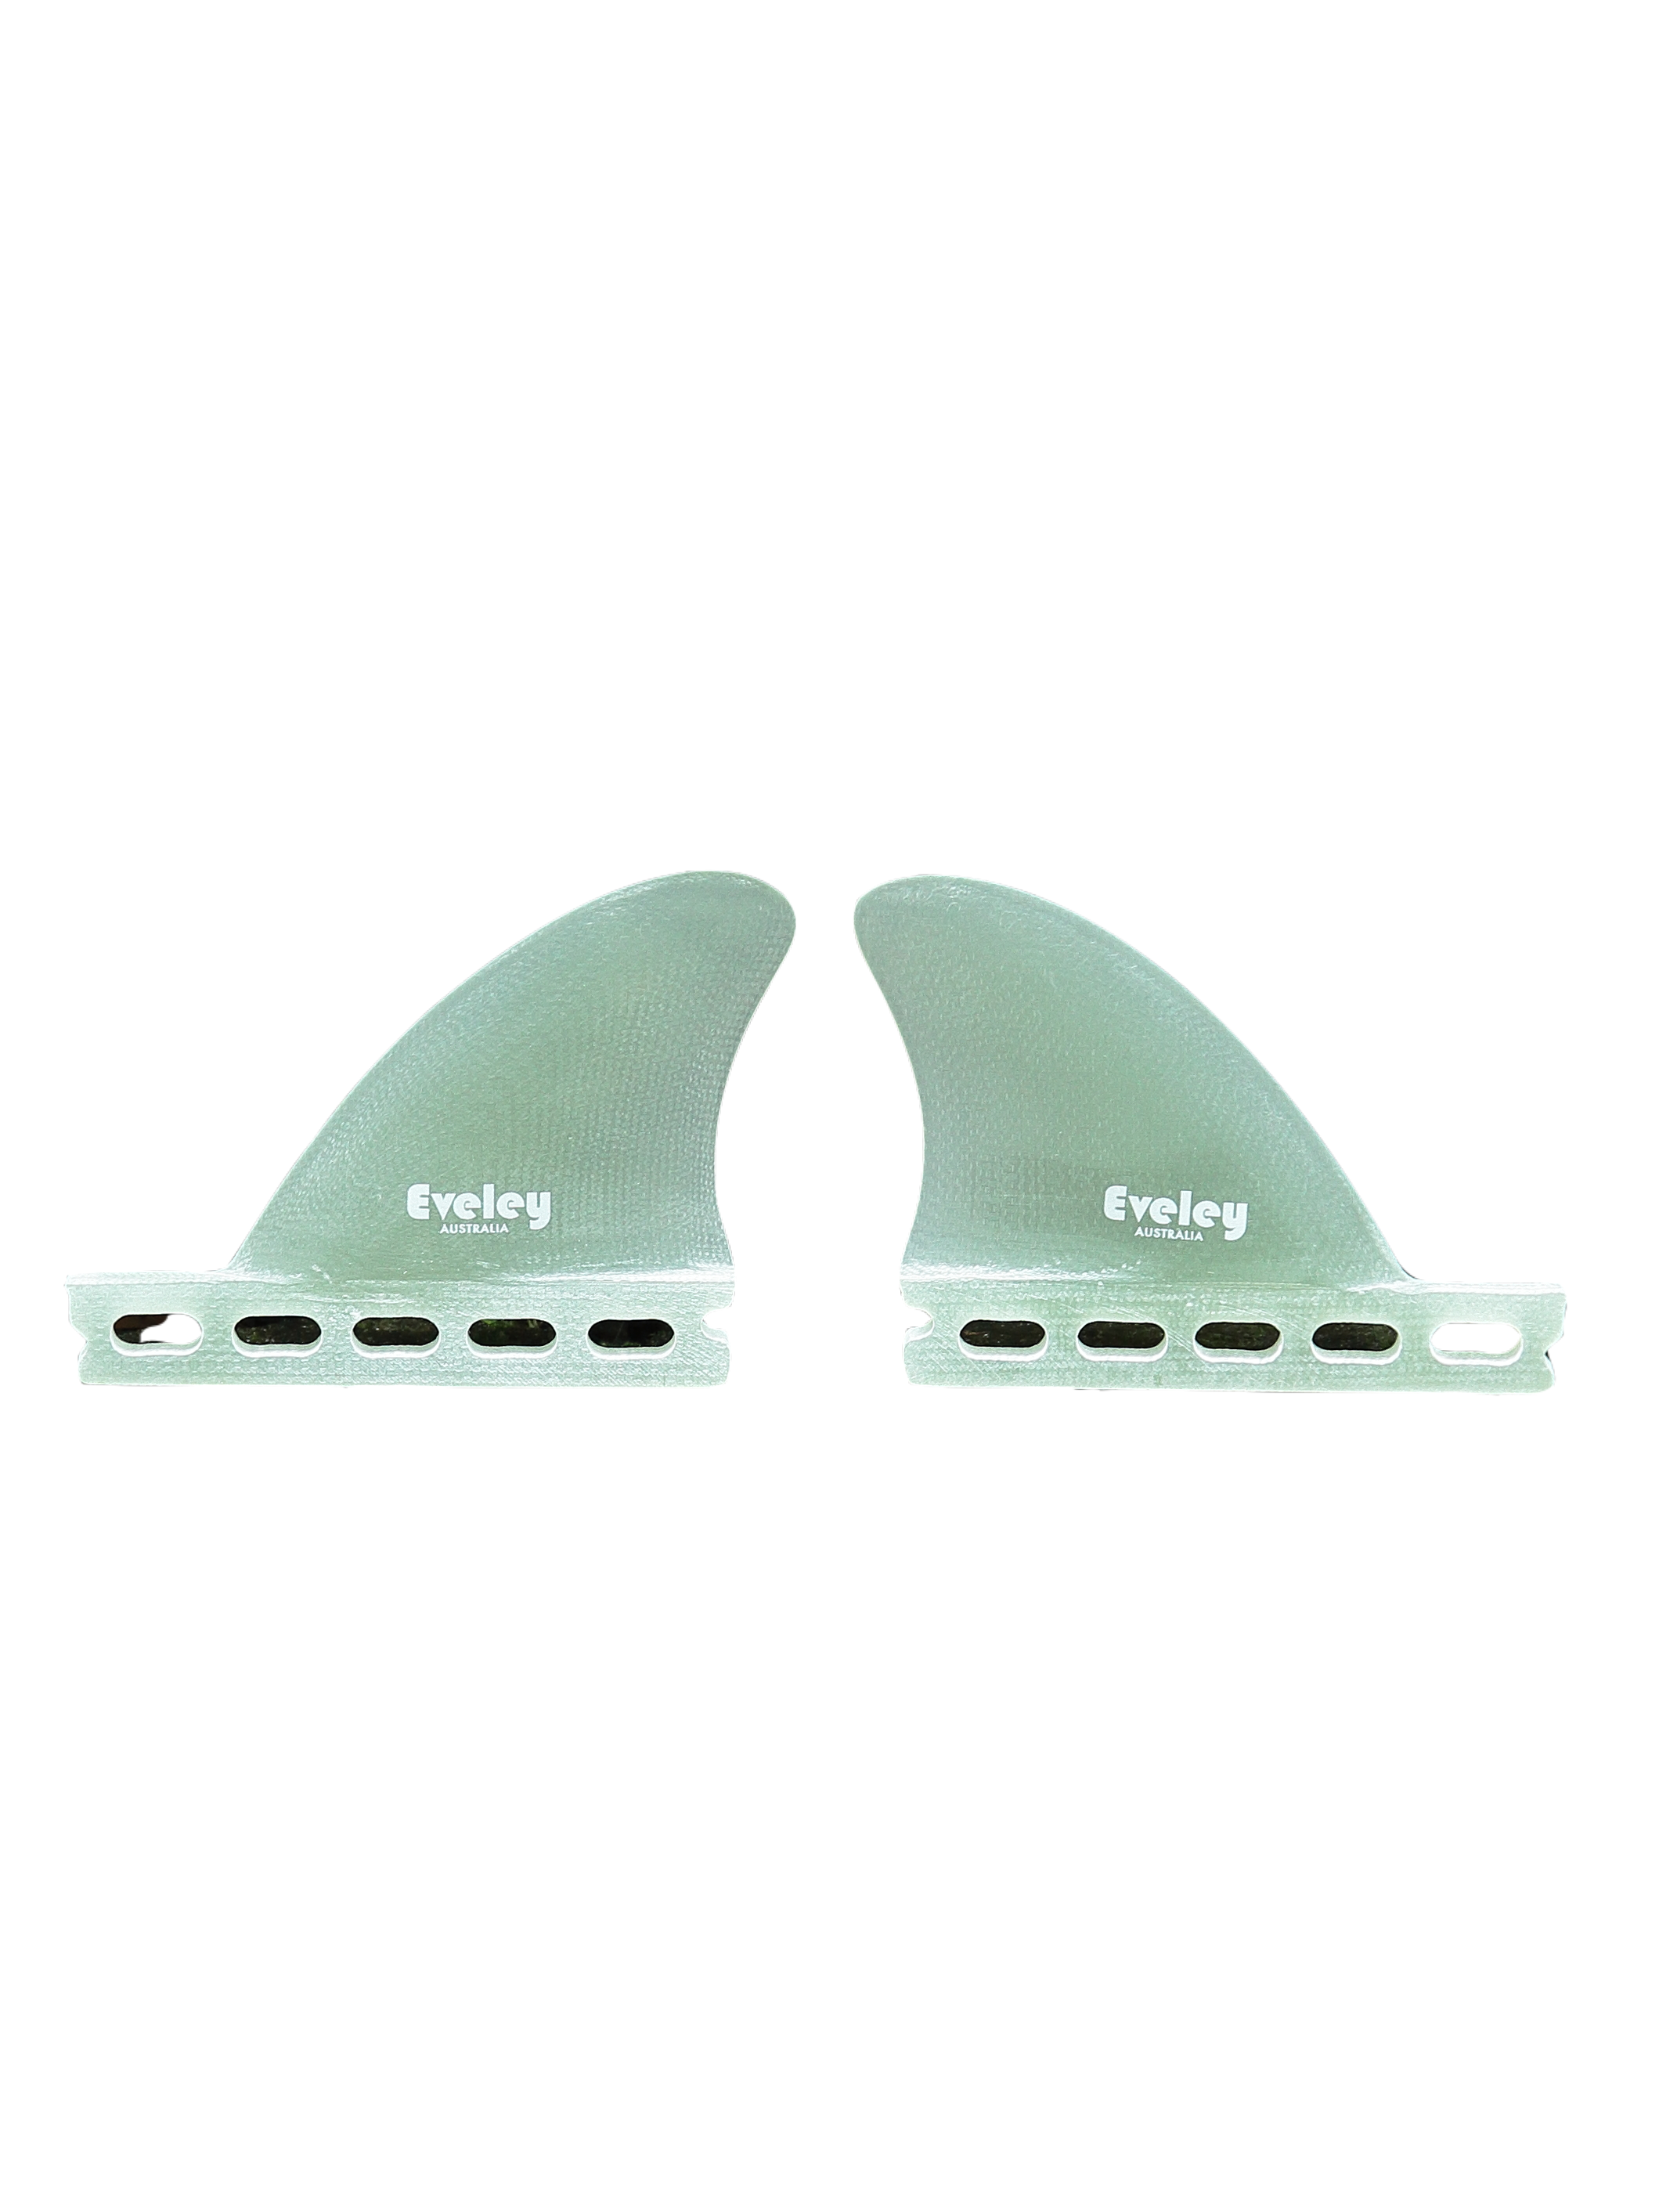 Details about   7.3 inch Highway '88 Eveley longboard fin in natural translucent colour. 